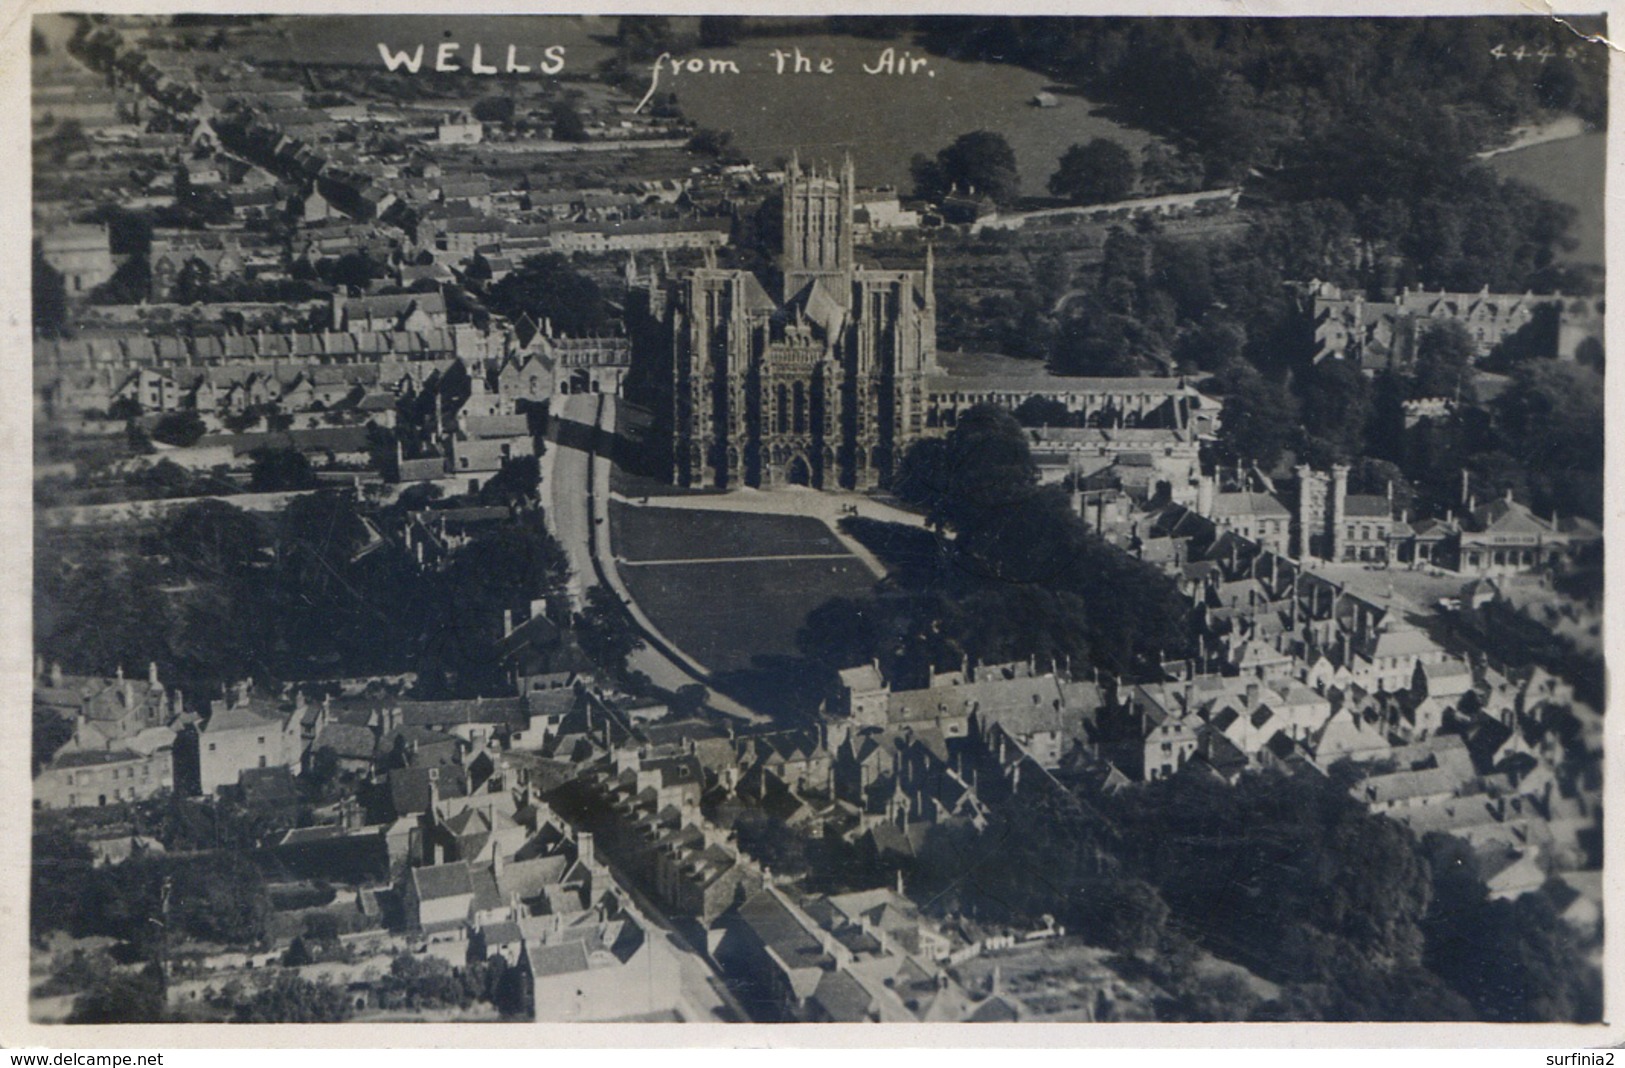 SOMERSET - WELLS FROM THE AIR RP RP Som425 - Wells